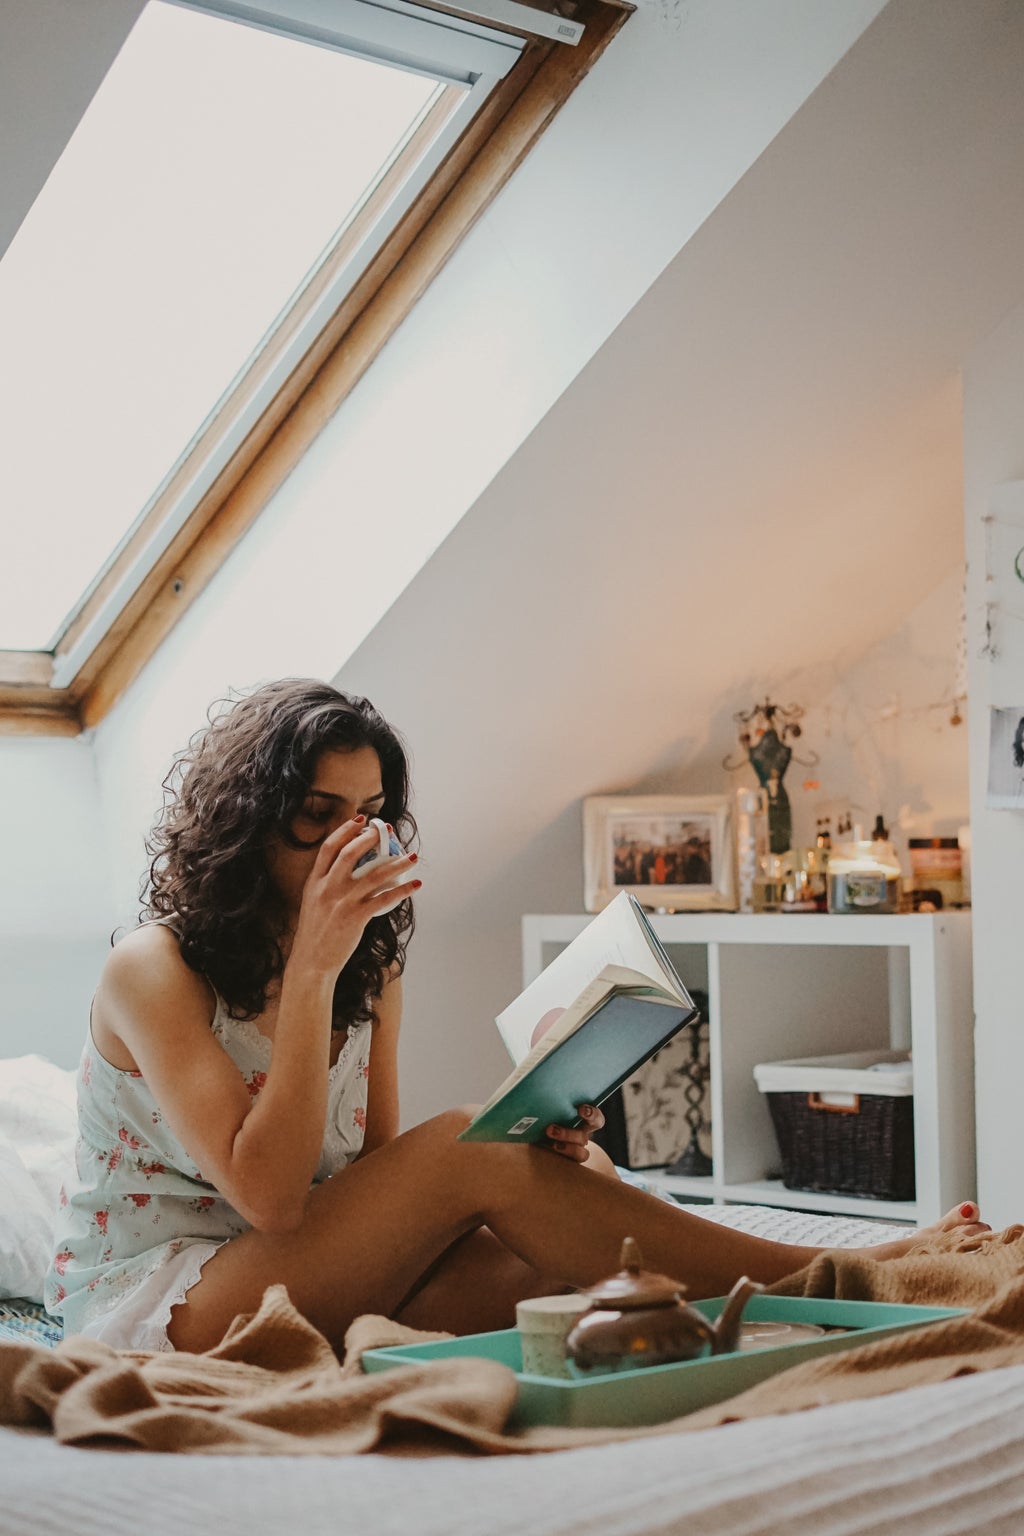 Girl sitting on bed, reading and drinking coffee.